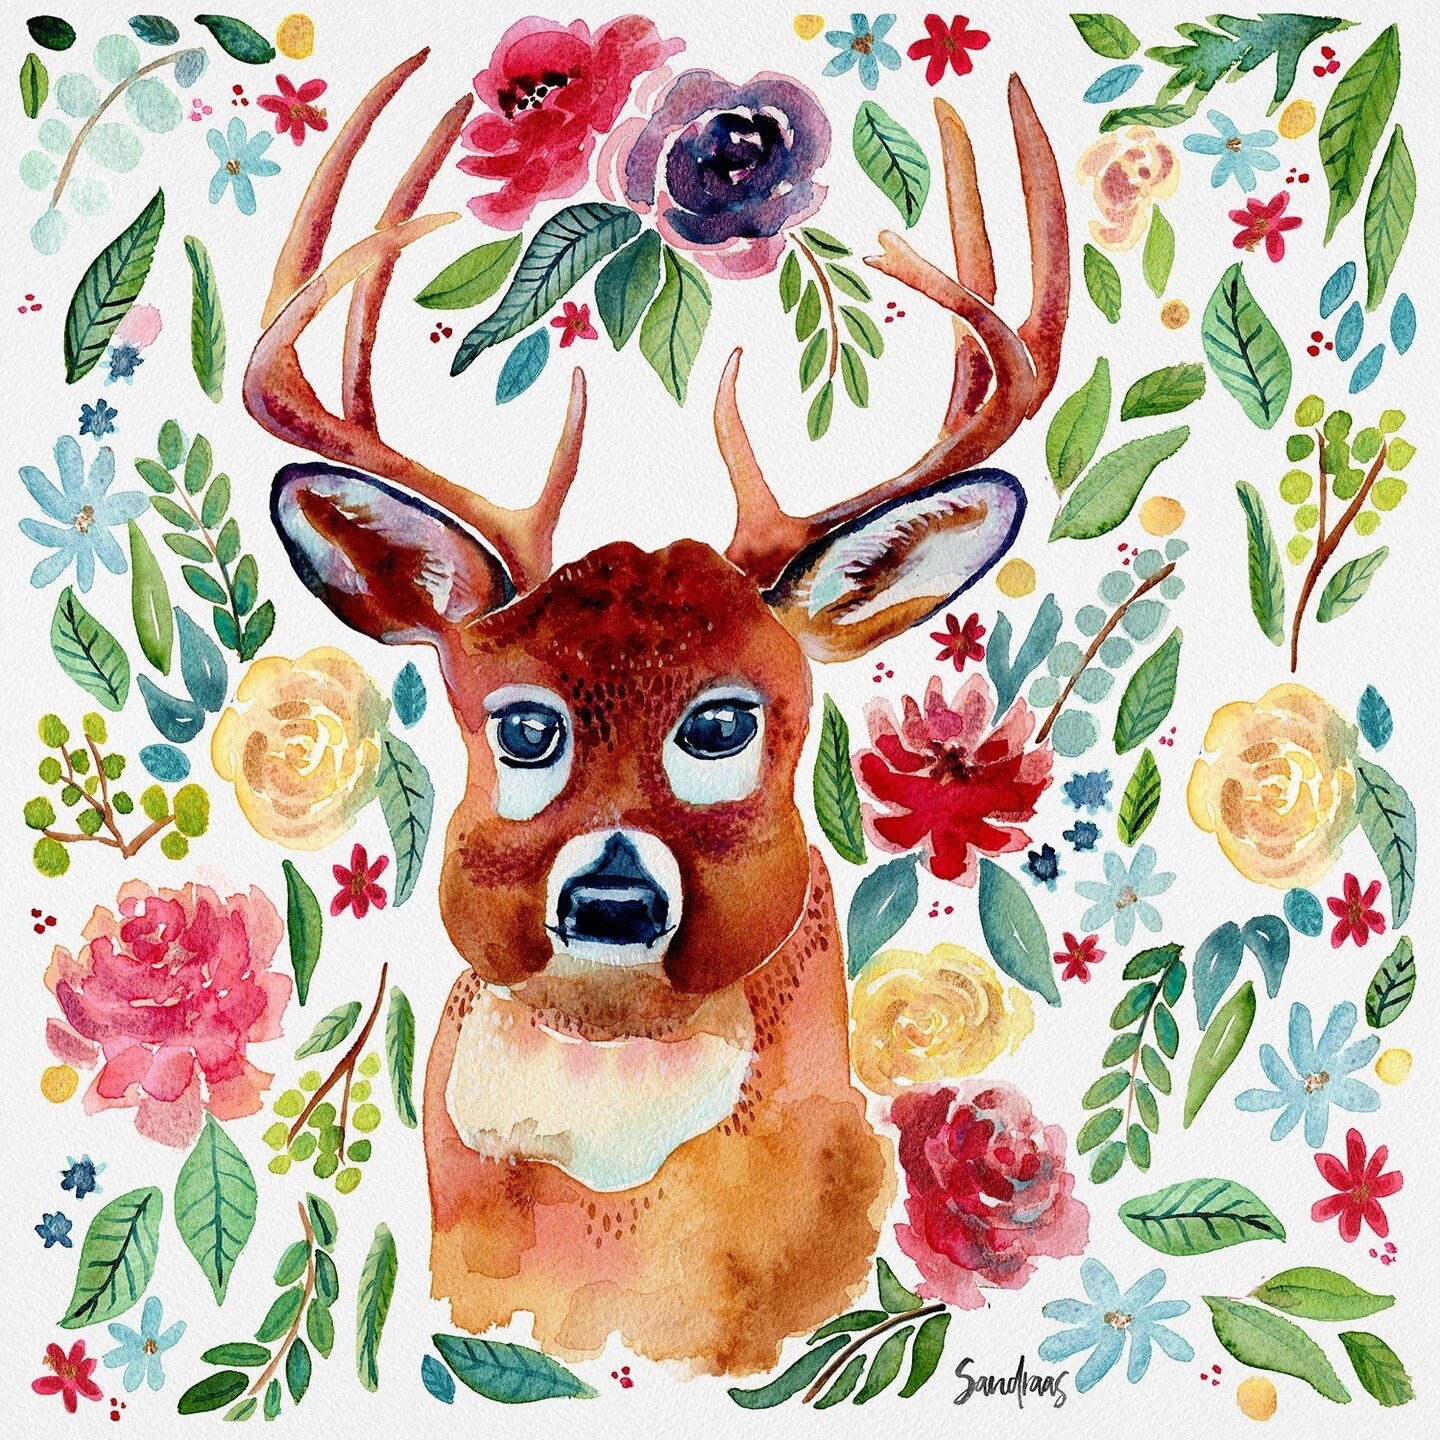 Lovely watercolor deer with colorful flowers!! I am loving this beauty 🥰⁠
.⁠
&gt;&gt; Swipe right to see this design on several kind of products! My favorites are the pillow and the tote bag 😍 What about yours?⁠
.⁠
Available now in my Society6 shop